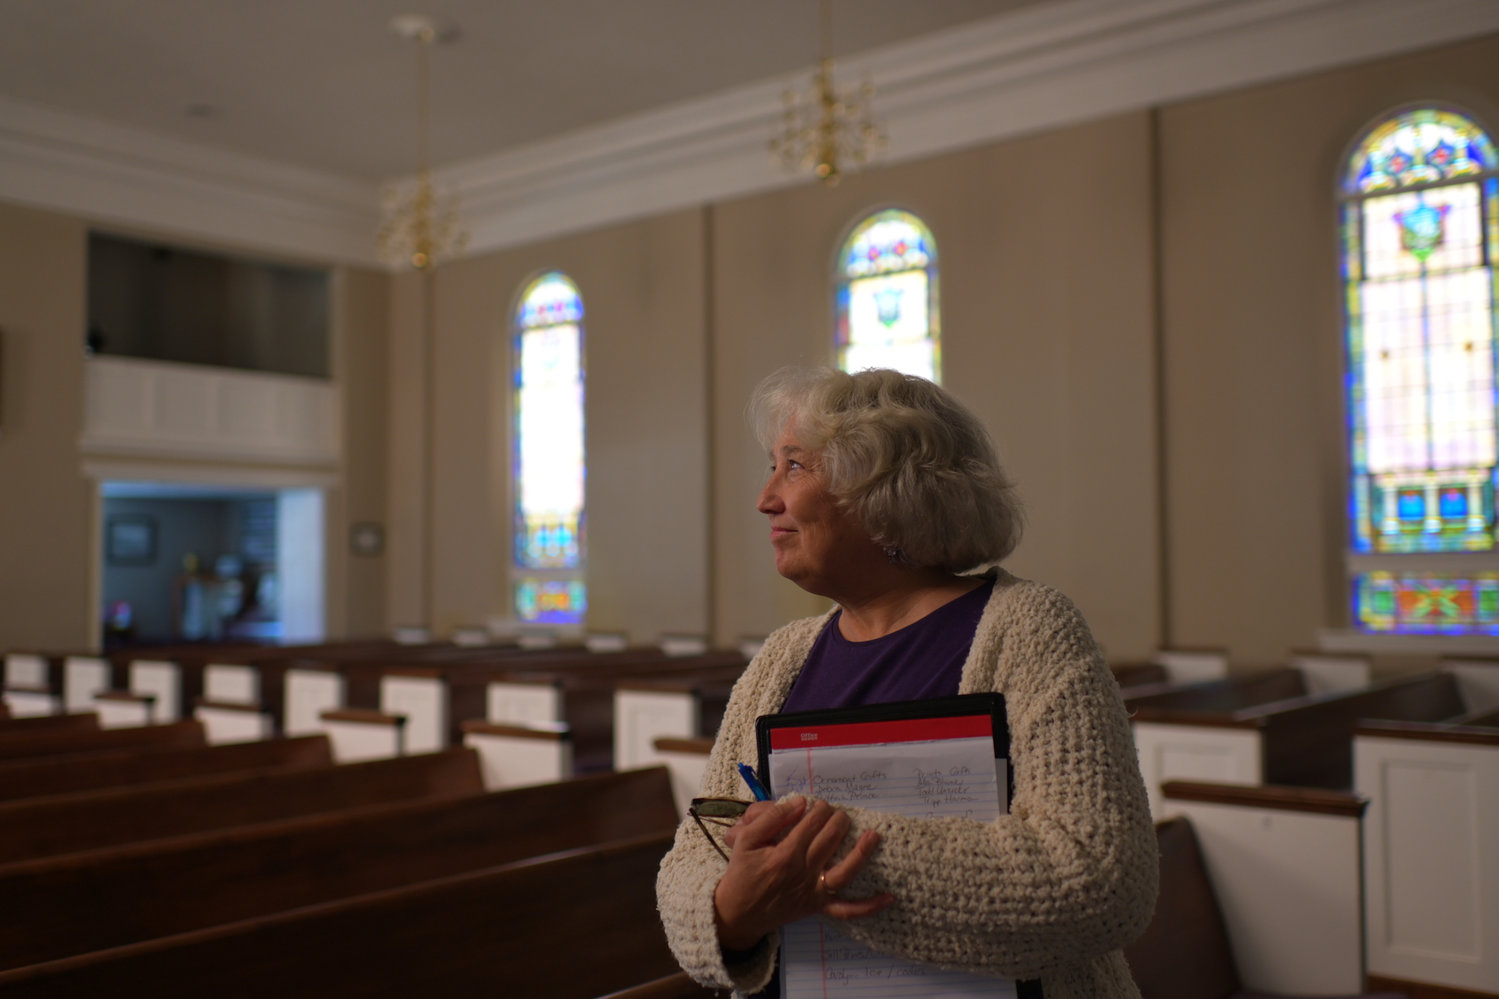 Kathy Shaffer, who's helping to coordinate the 175th anniversary activities at Pittsboro Baptist Church, looks around the church's sanctuary. The milestone is being celebrated through October.